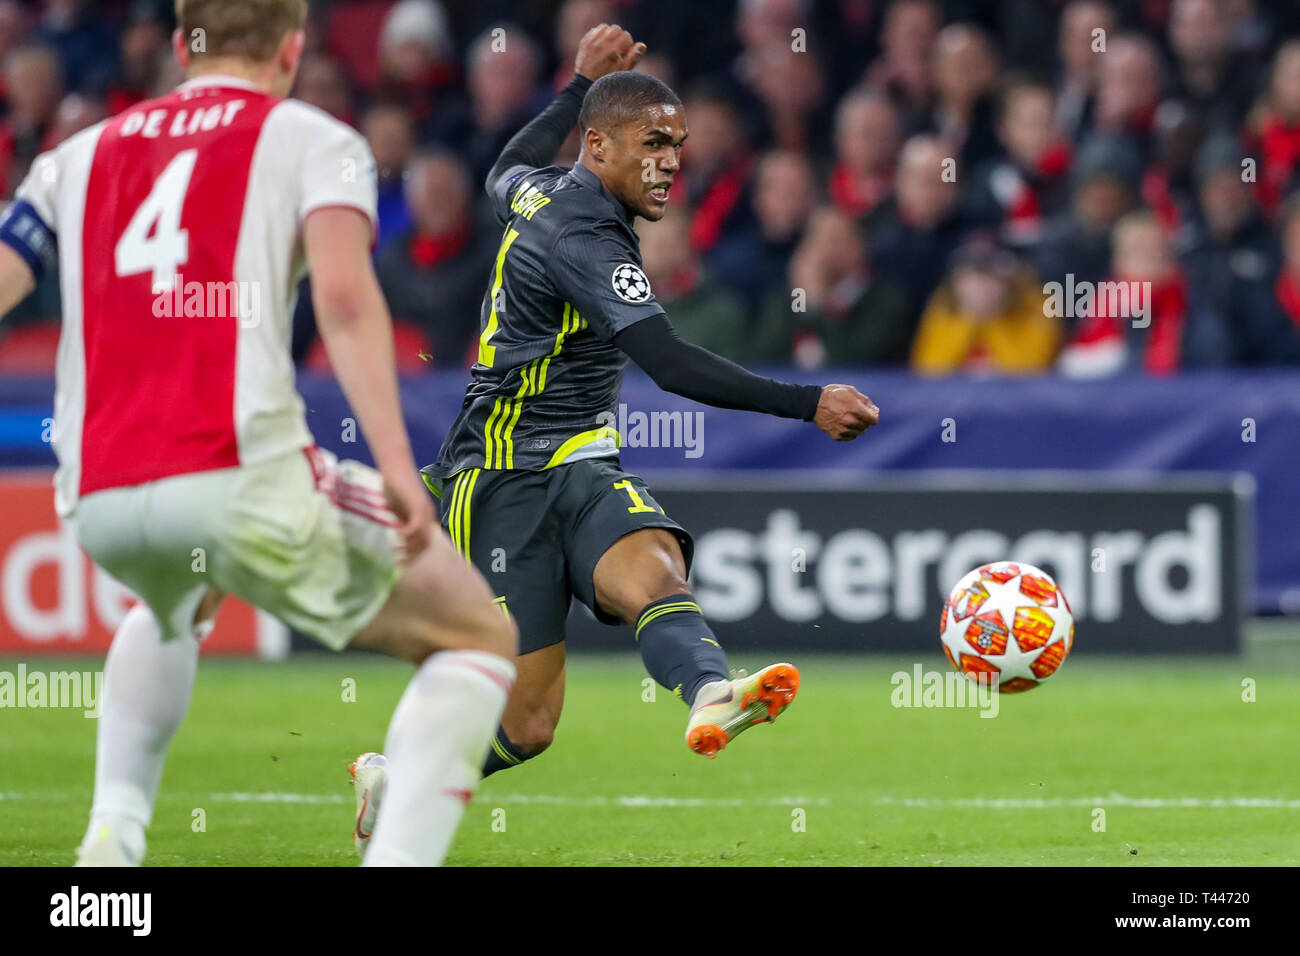 10th of april 2019 Amsterdam, The Netherlands Soccer Champions League Ajax v Juventus   Douglas Costa of Juventus Stock Photo